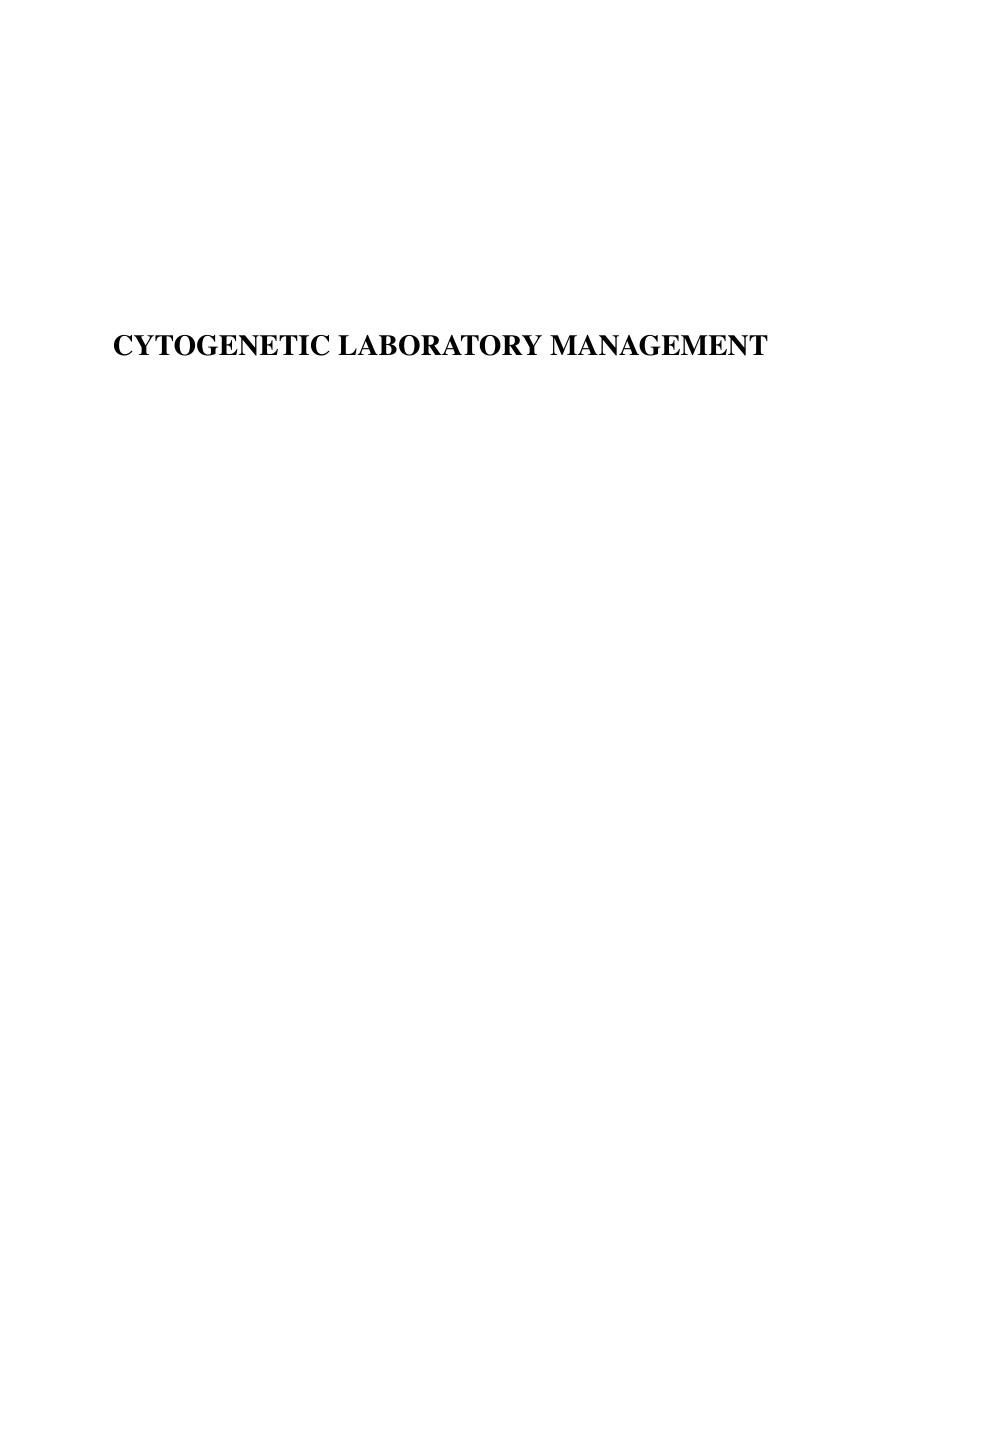 Cytogenetic laboratory management   chromosomal, FISH, and microarray-based best practices and procedures (2016)